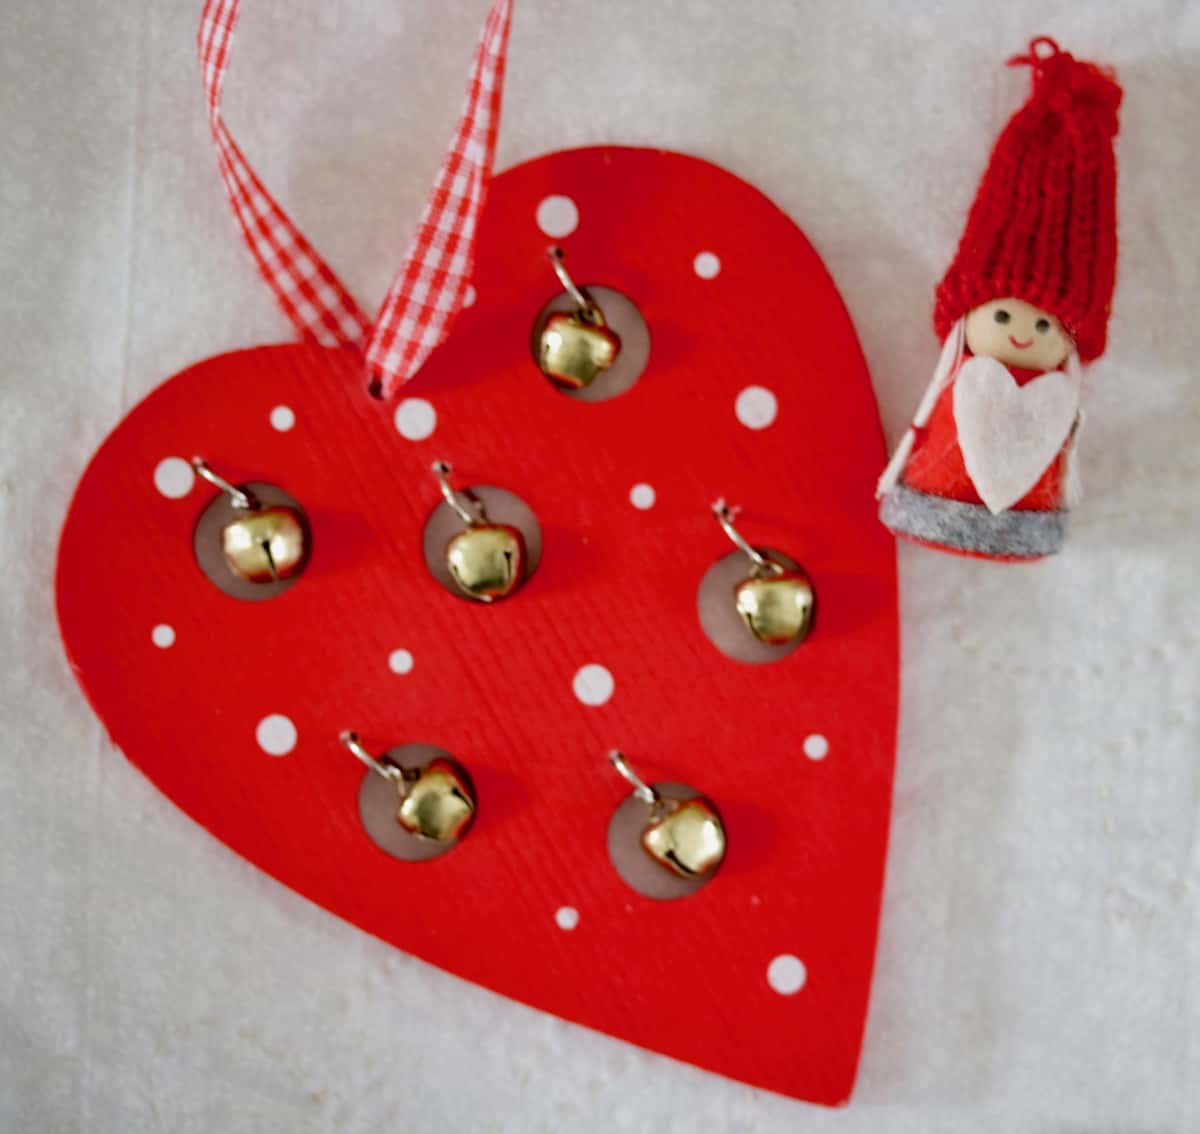 the heart knows goodness with these Finnish heart shaped xmas ornaments